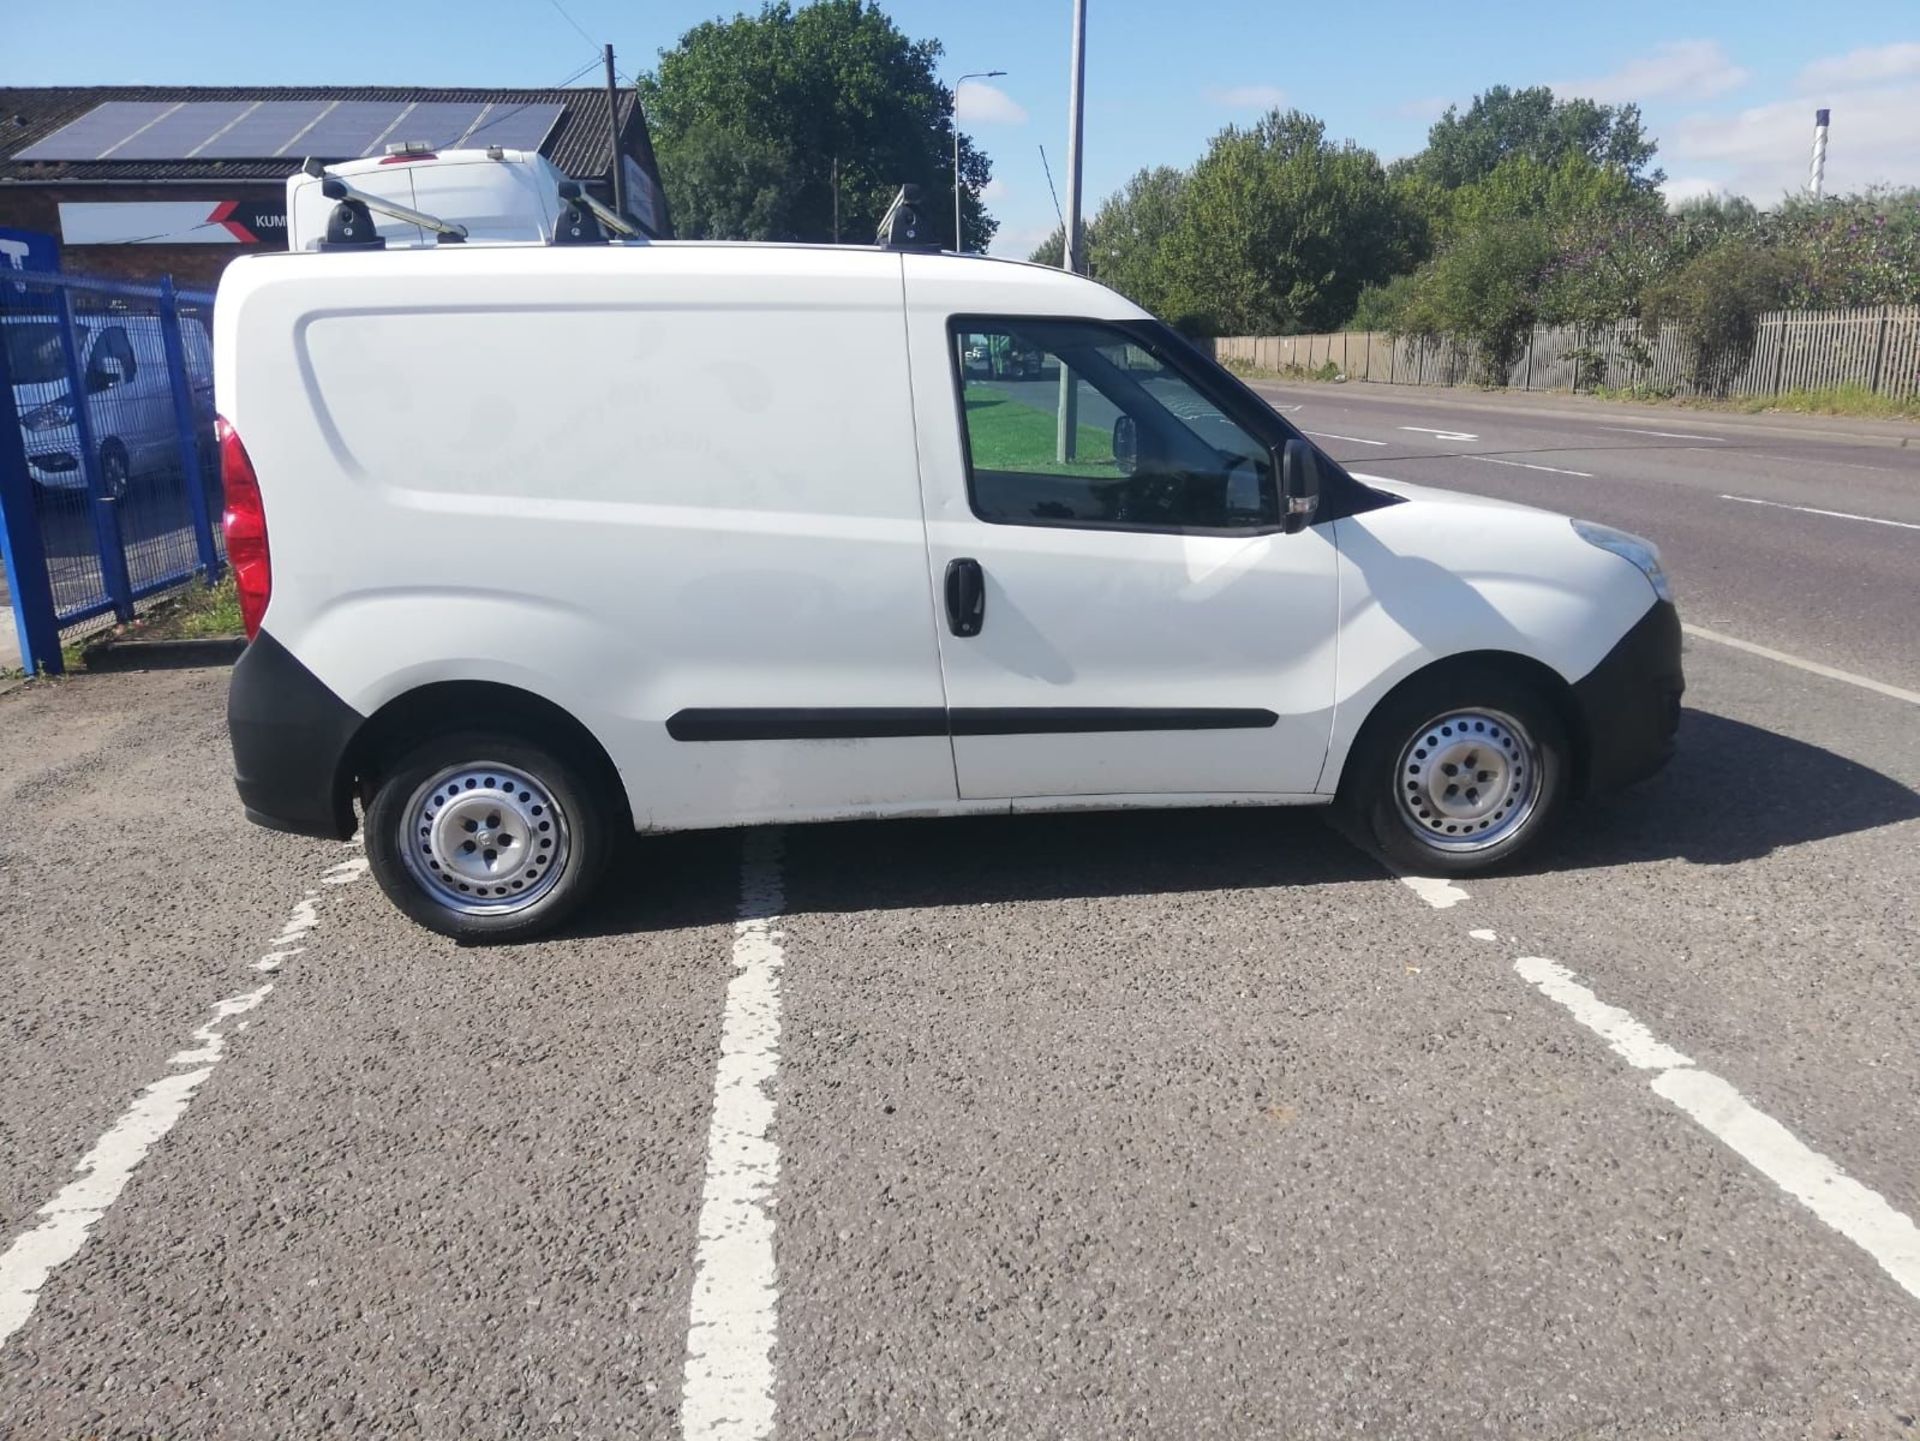 2013 63 Vauxhall Combo Panel van - 84k miles - Roof rack - Ply lined - Image 8 of 10